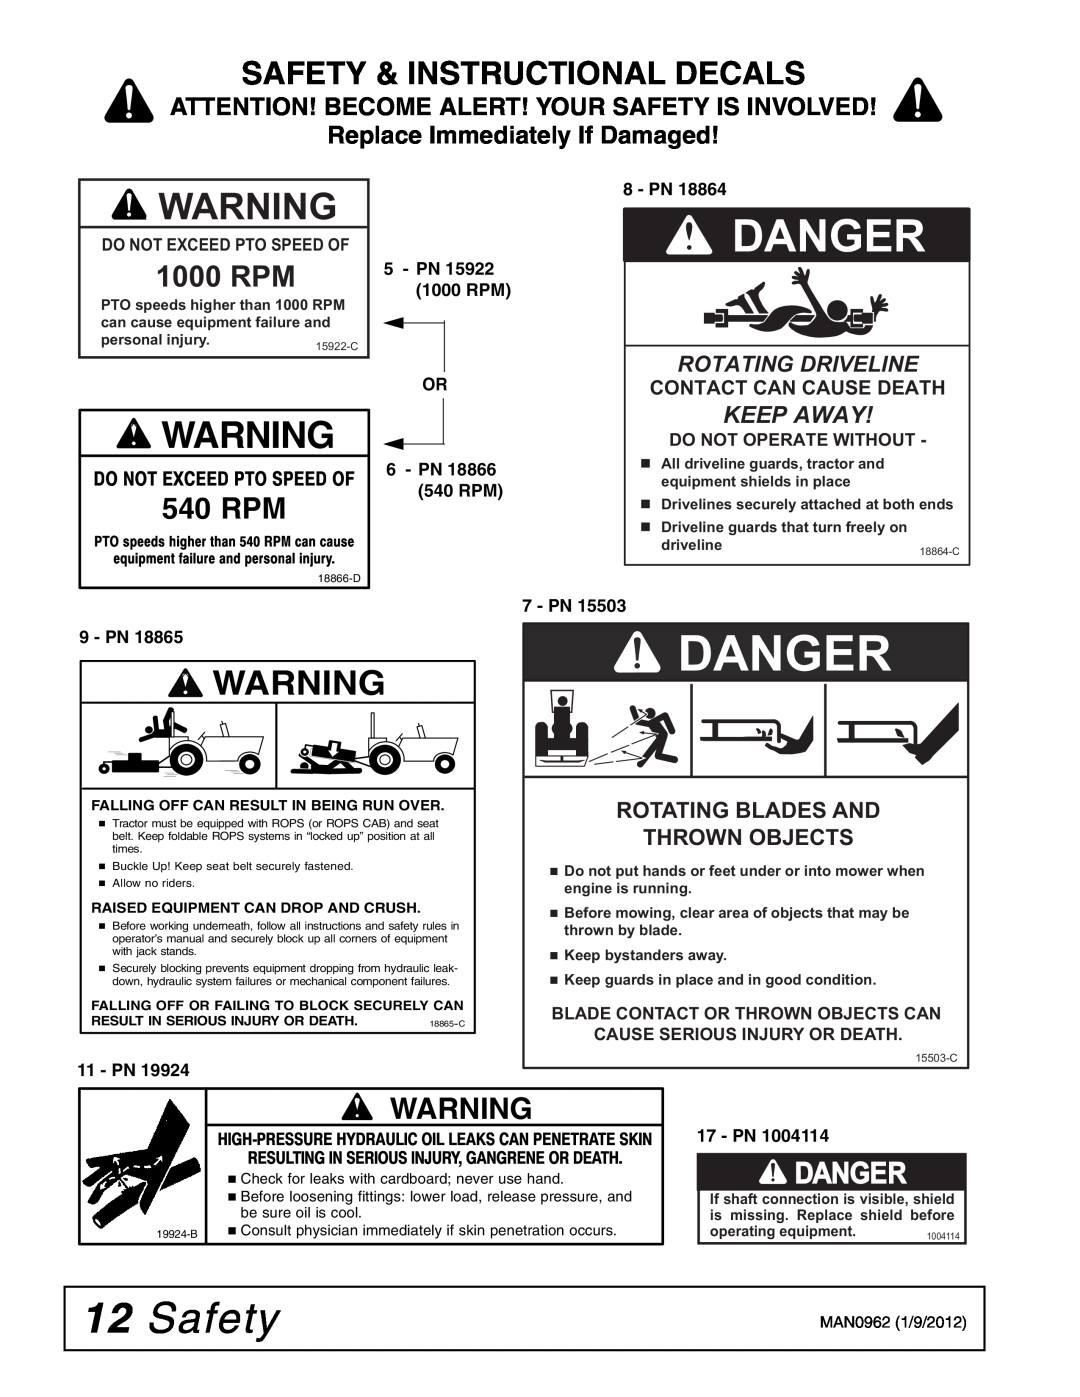 Woods Equipment BW180XQ Danger, Safety & Instructional Decals, 1000 RPM, Replace Immediately If Damaged, Keep Away 